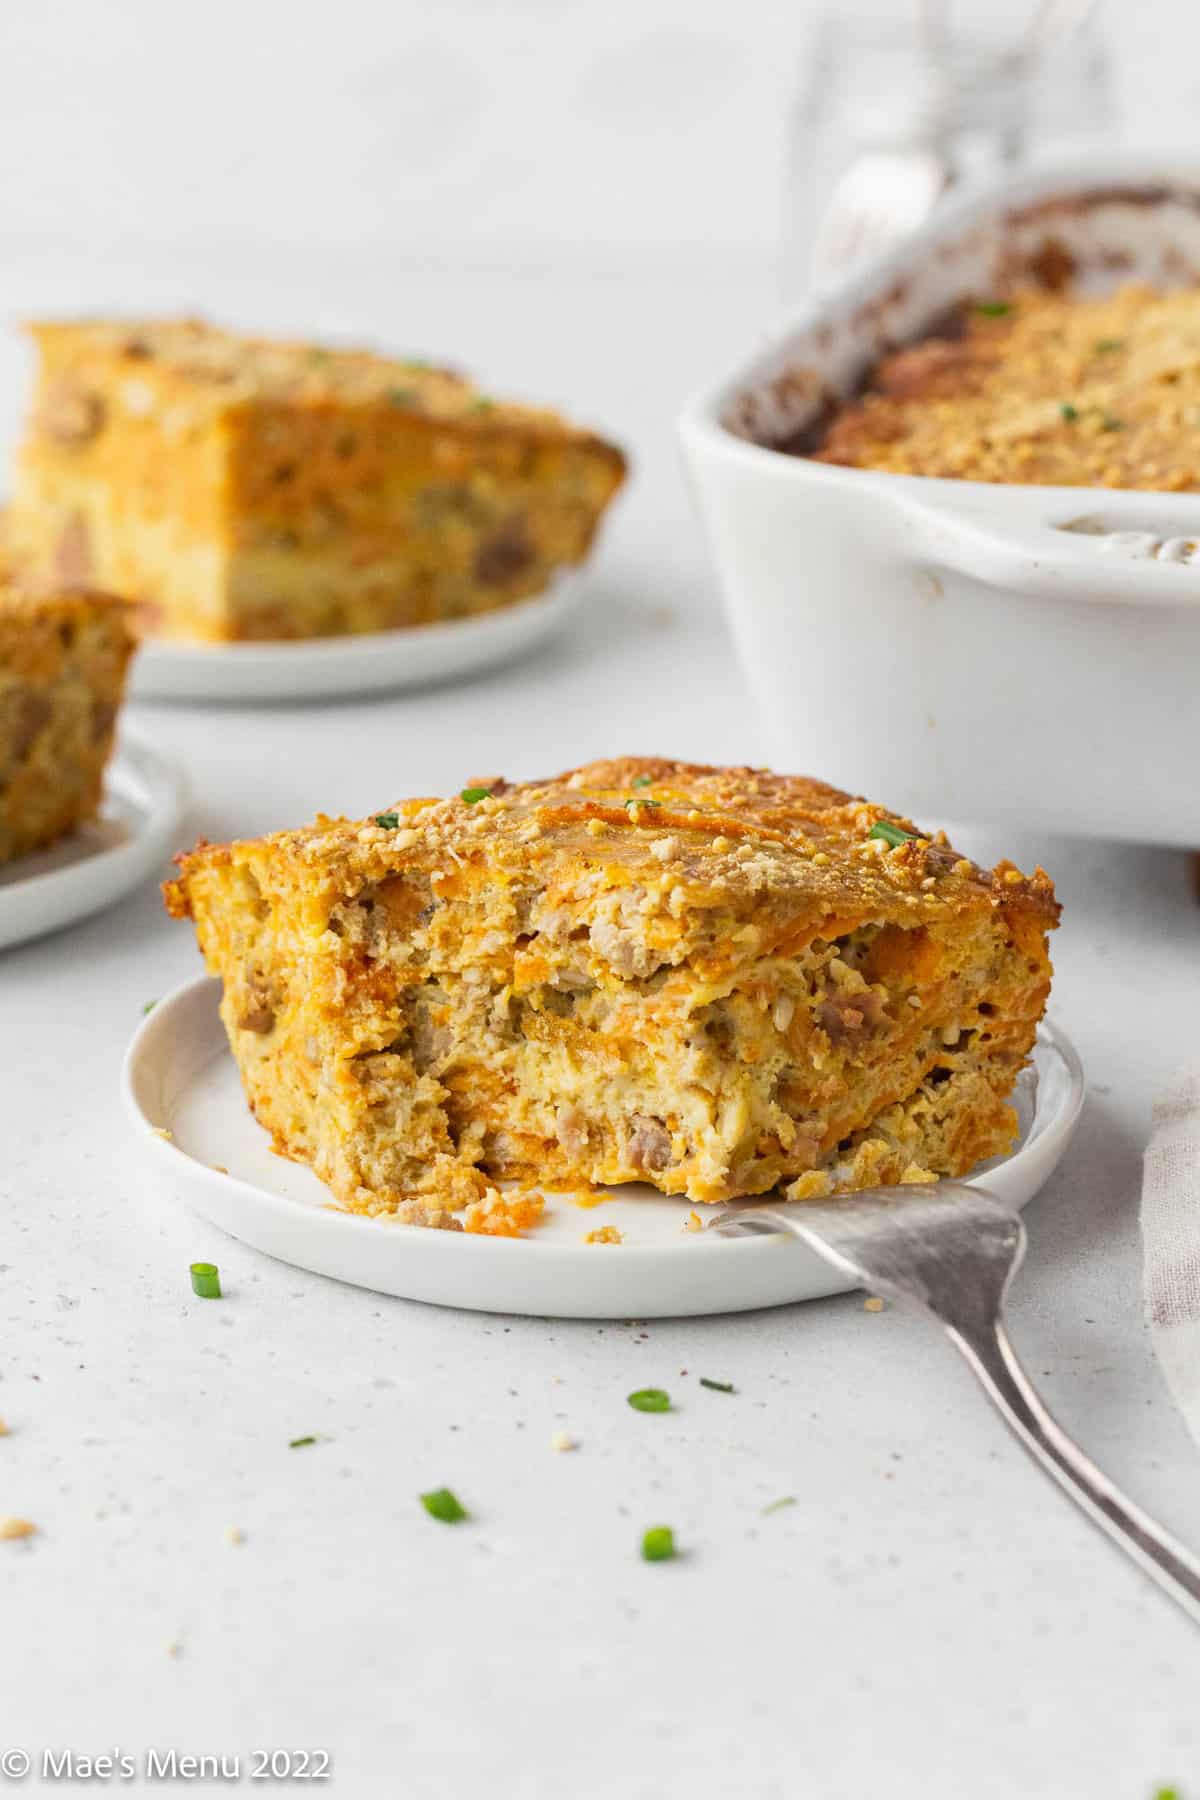 A large piece of dairy free breakfast casserole with a bite taken out of it.